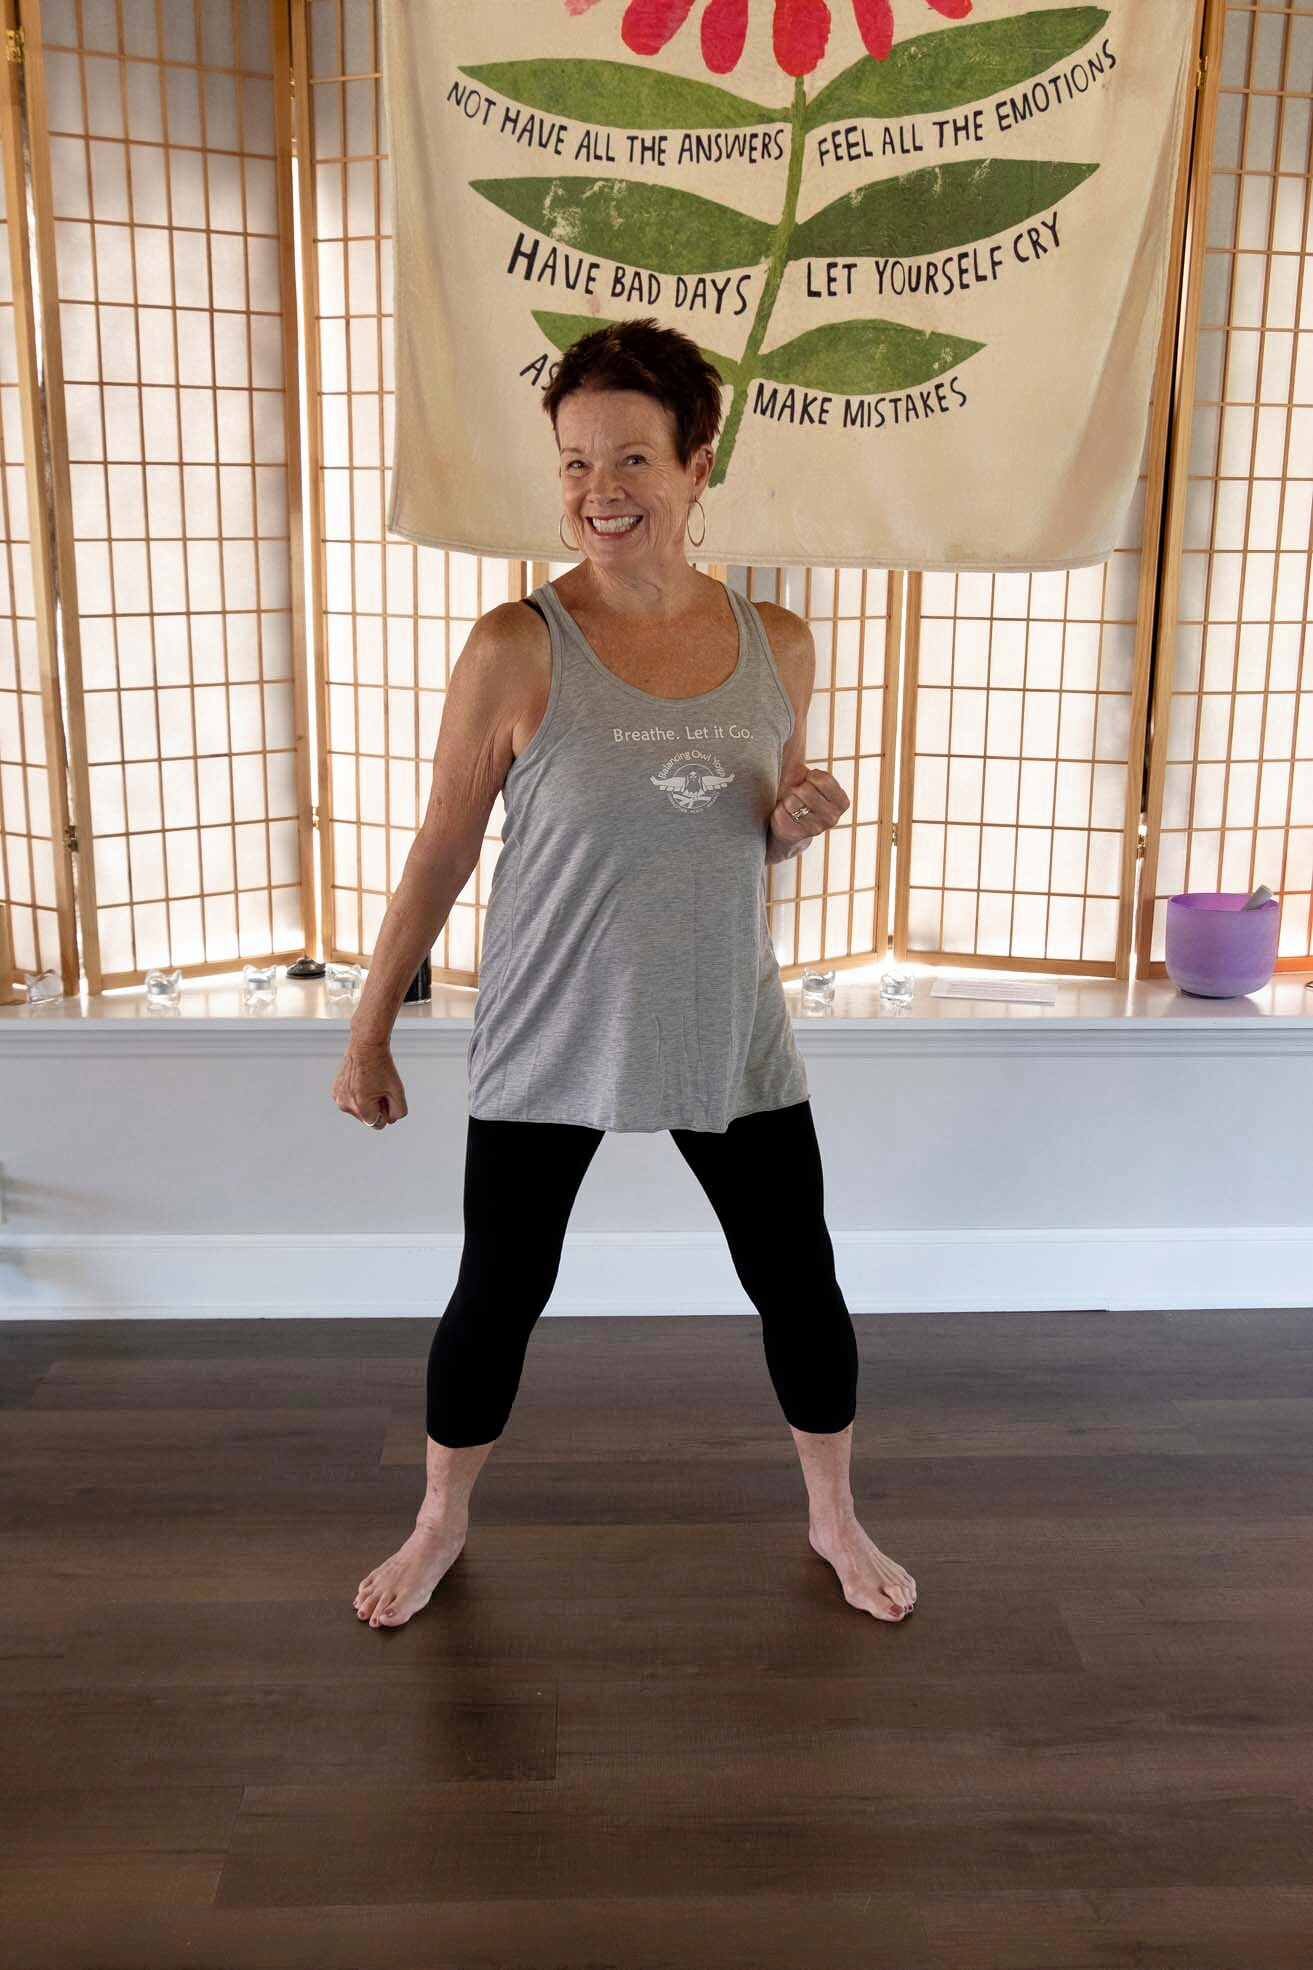 Janis W. — A Yoga & Wellness Community Without Judgement or